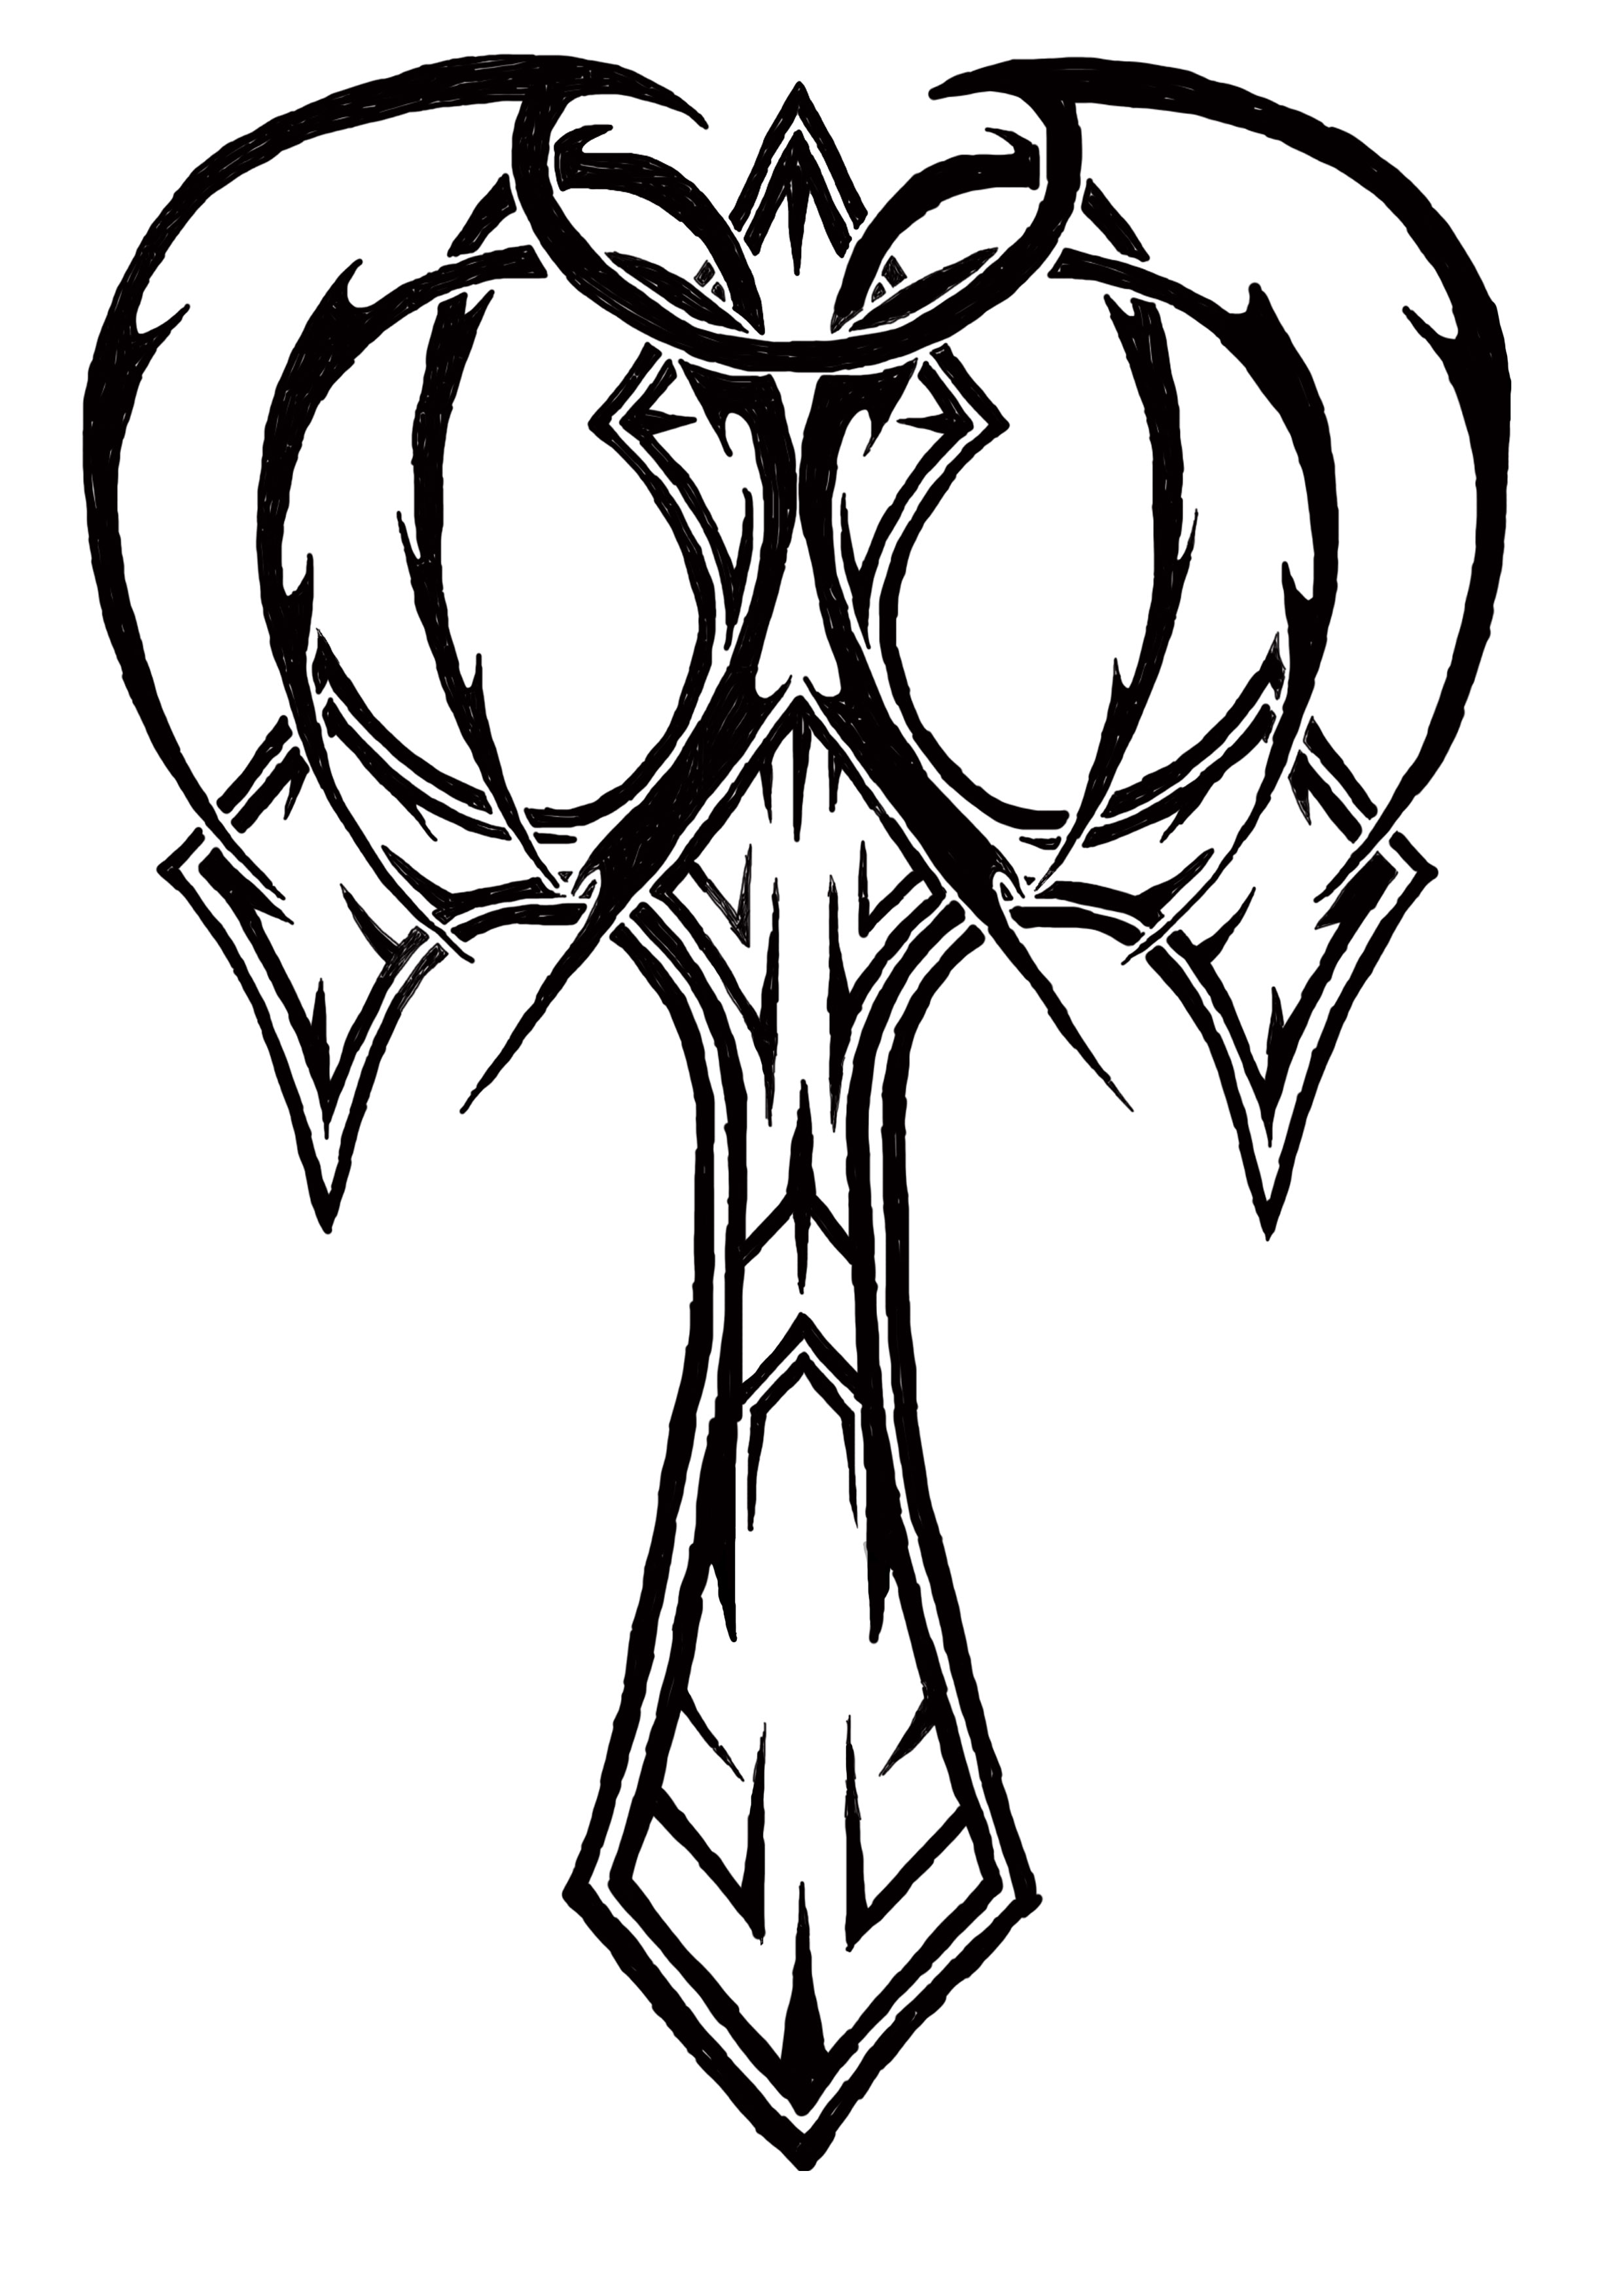 Cool Cross Designs To Draw - ClipArt Best